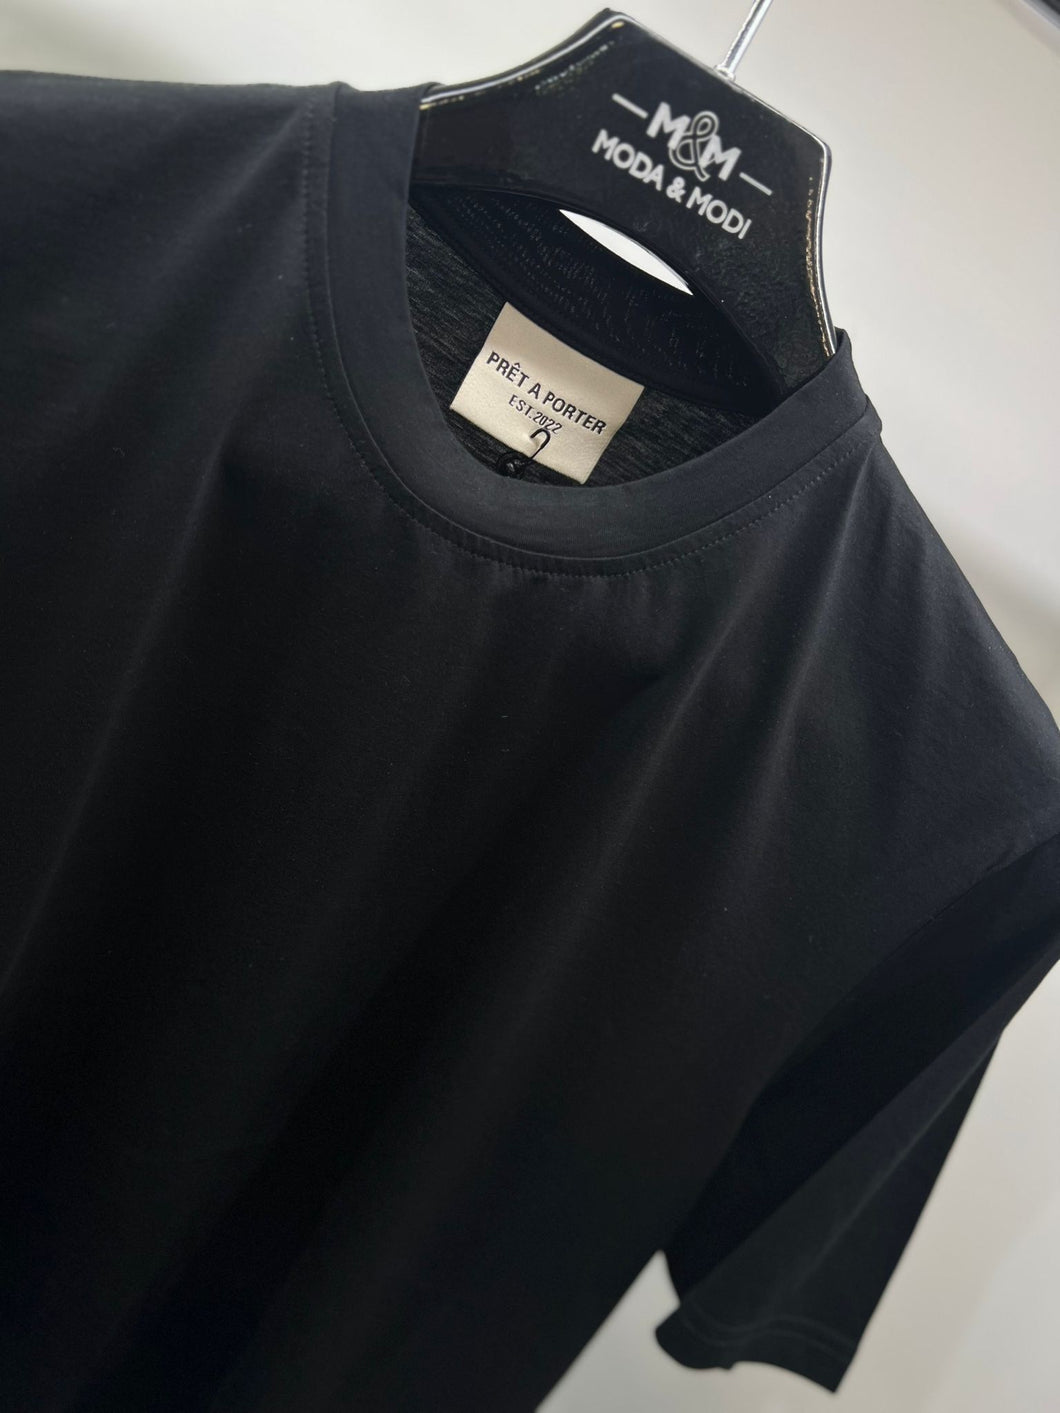 PRET A PORTER T-SHIRT BY YES LONDON